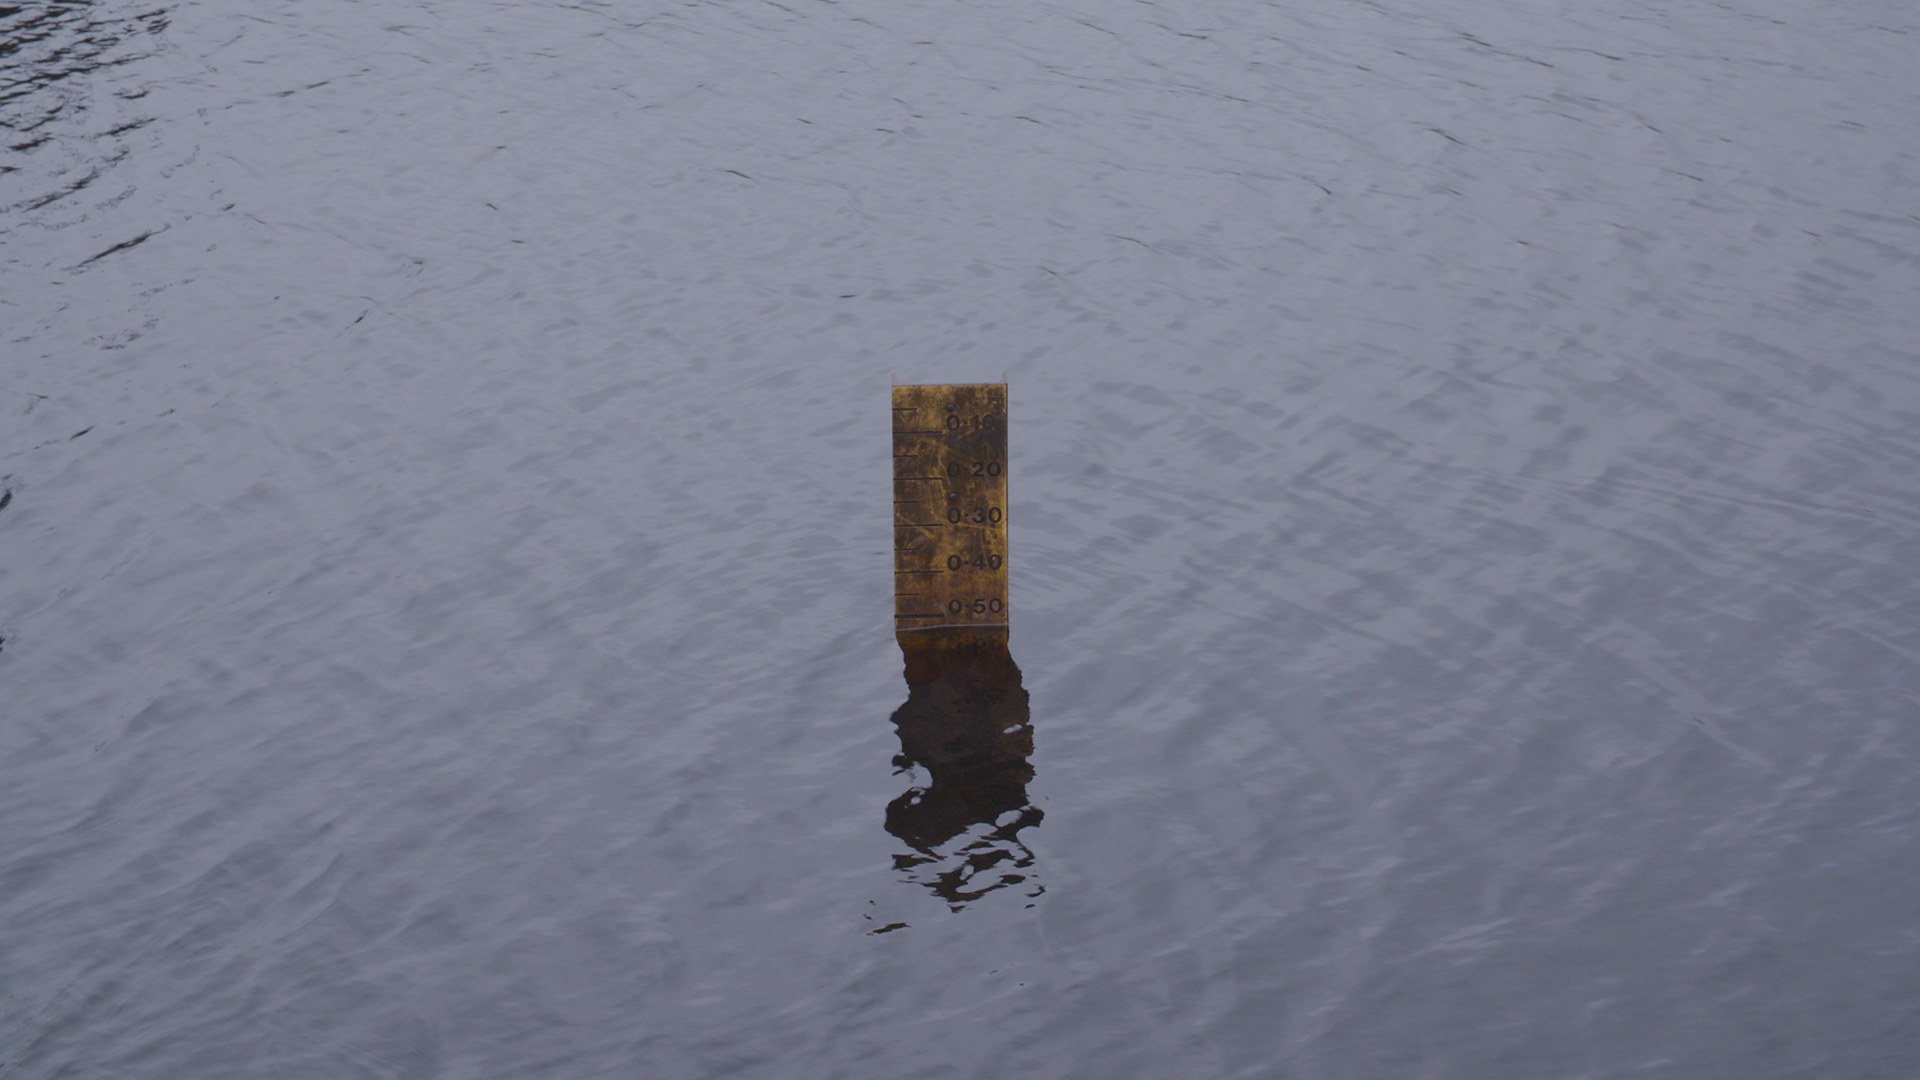 A photograph of the top of a measure appearing out of a body of water.